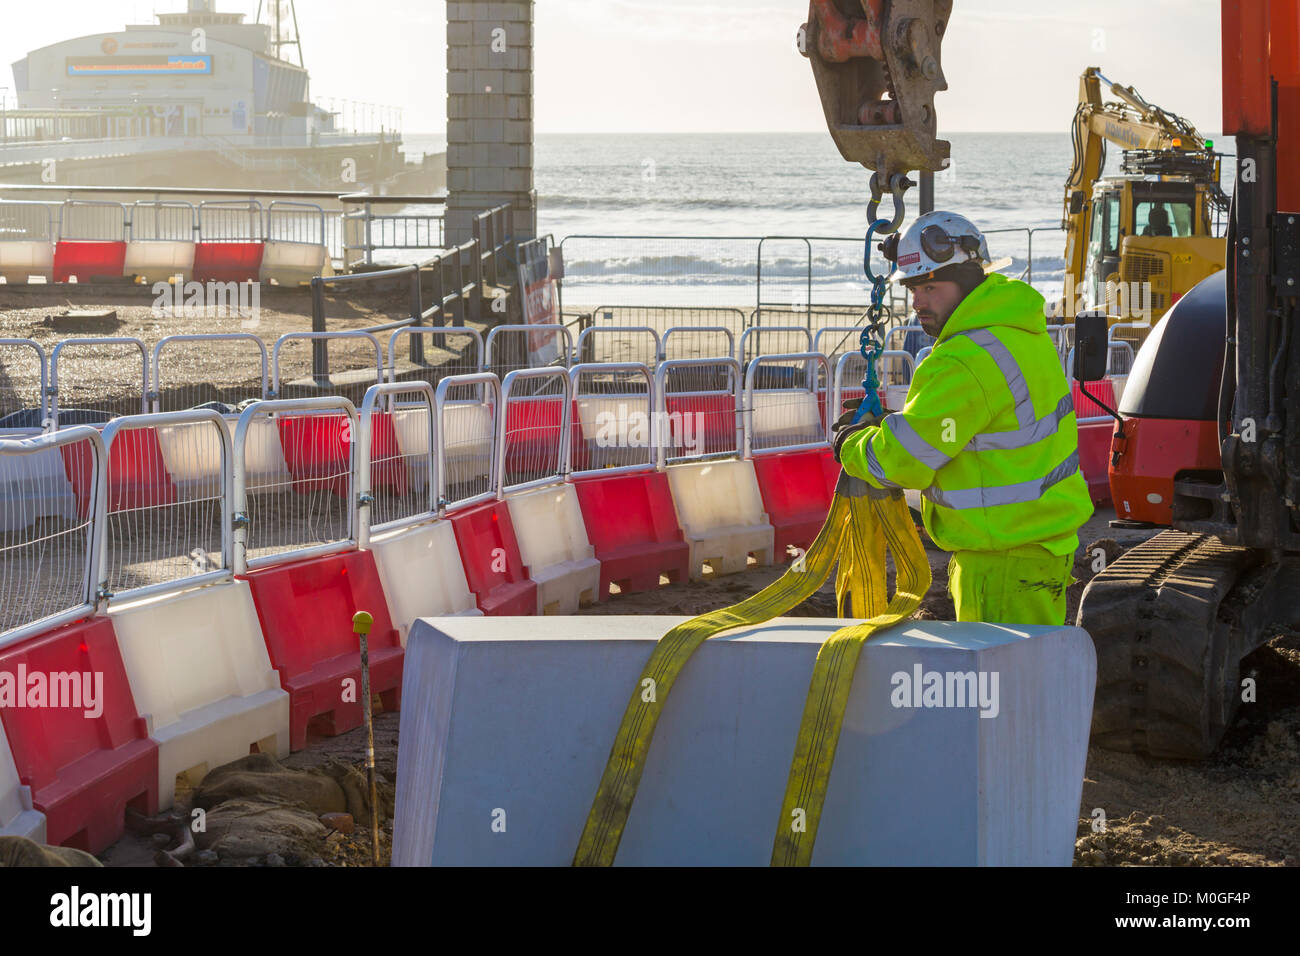 Renovations and resurfacing work at Pier Approach, Bournemouth, Dorset UK in January Stock Photo